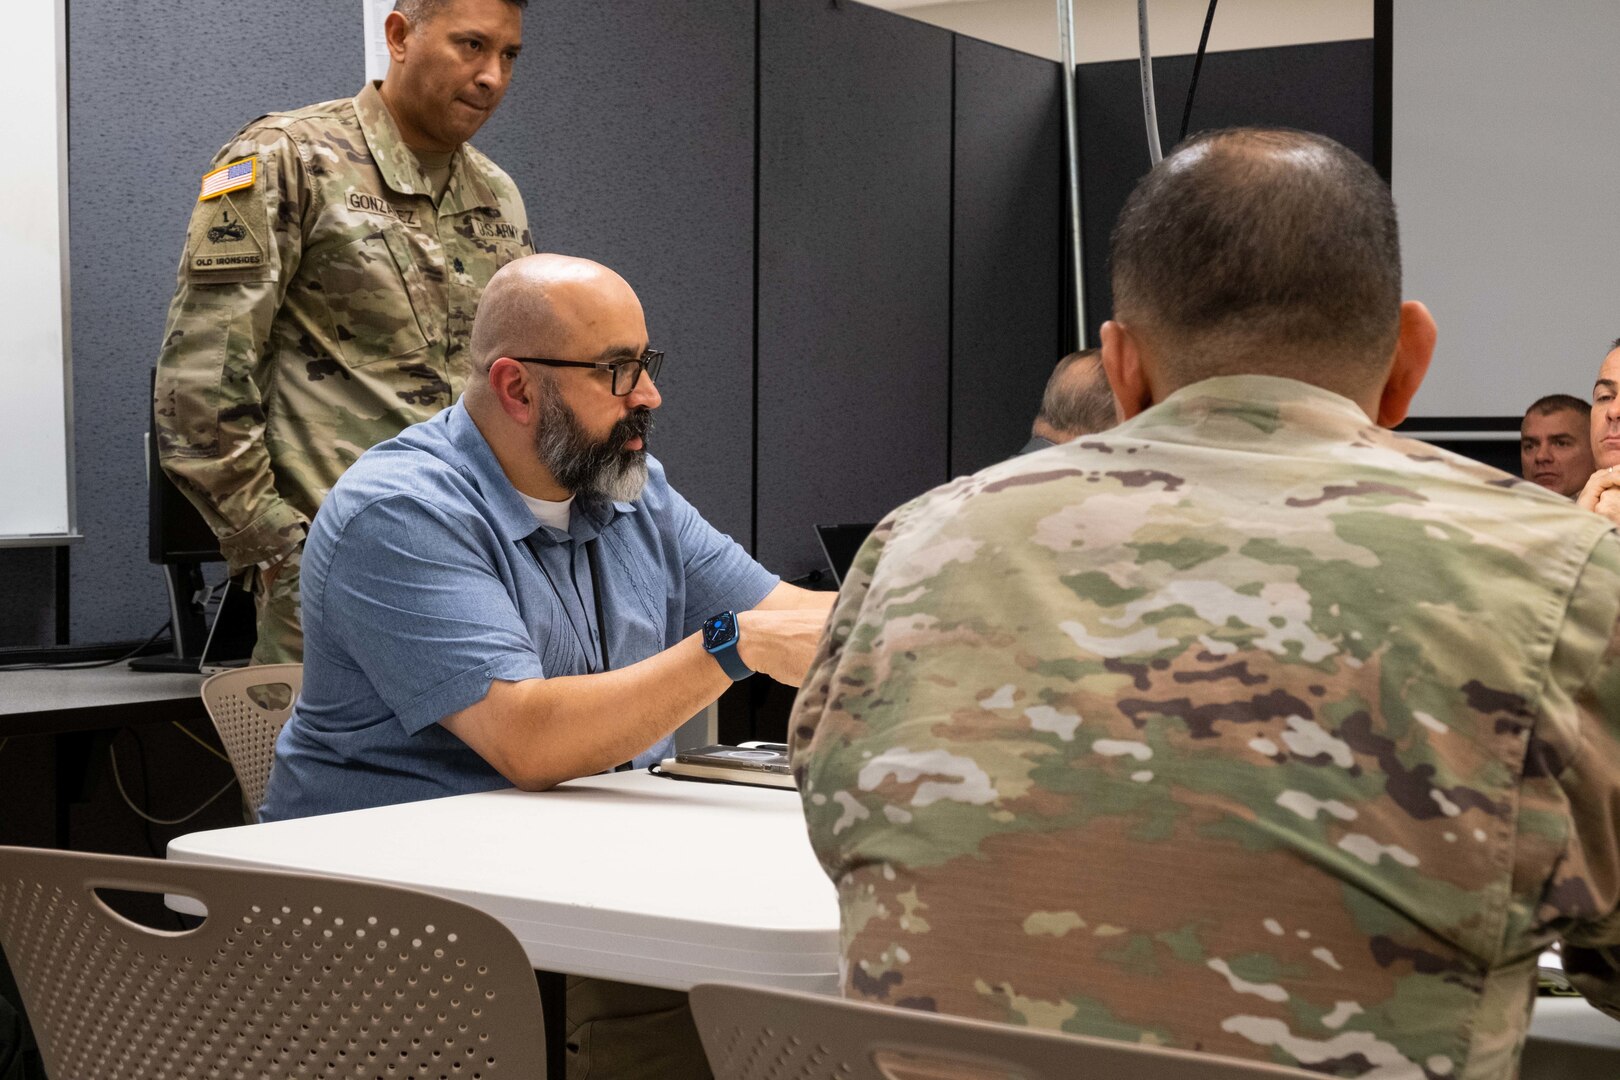 Pete Ramos, logistics management specialist at Army Medical Logistics Command, addresses other members of his working group during a workshop on Medical Logistics in Campaigning and its impact on the National Guard and Reserve at Fort Sam Houston, Texas, Nov. 29.